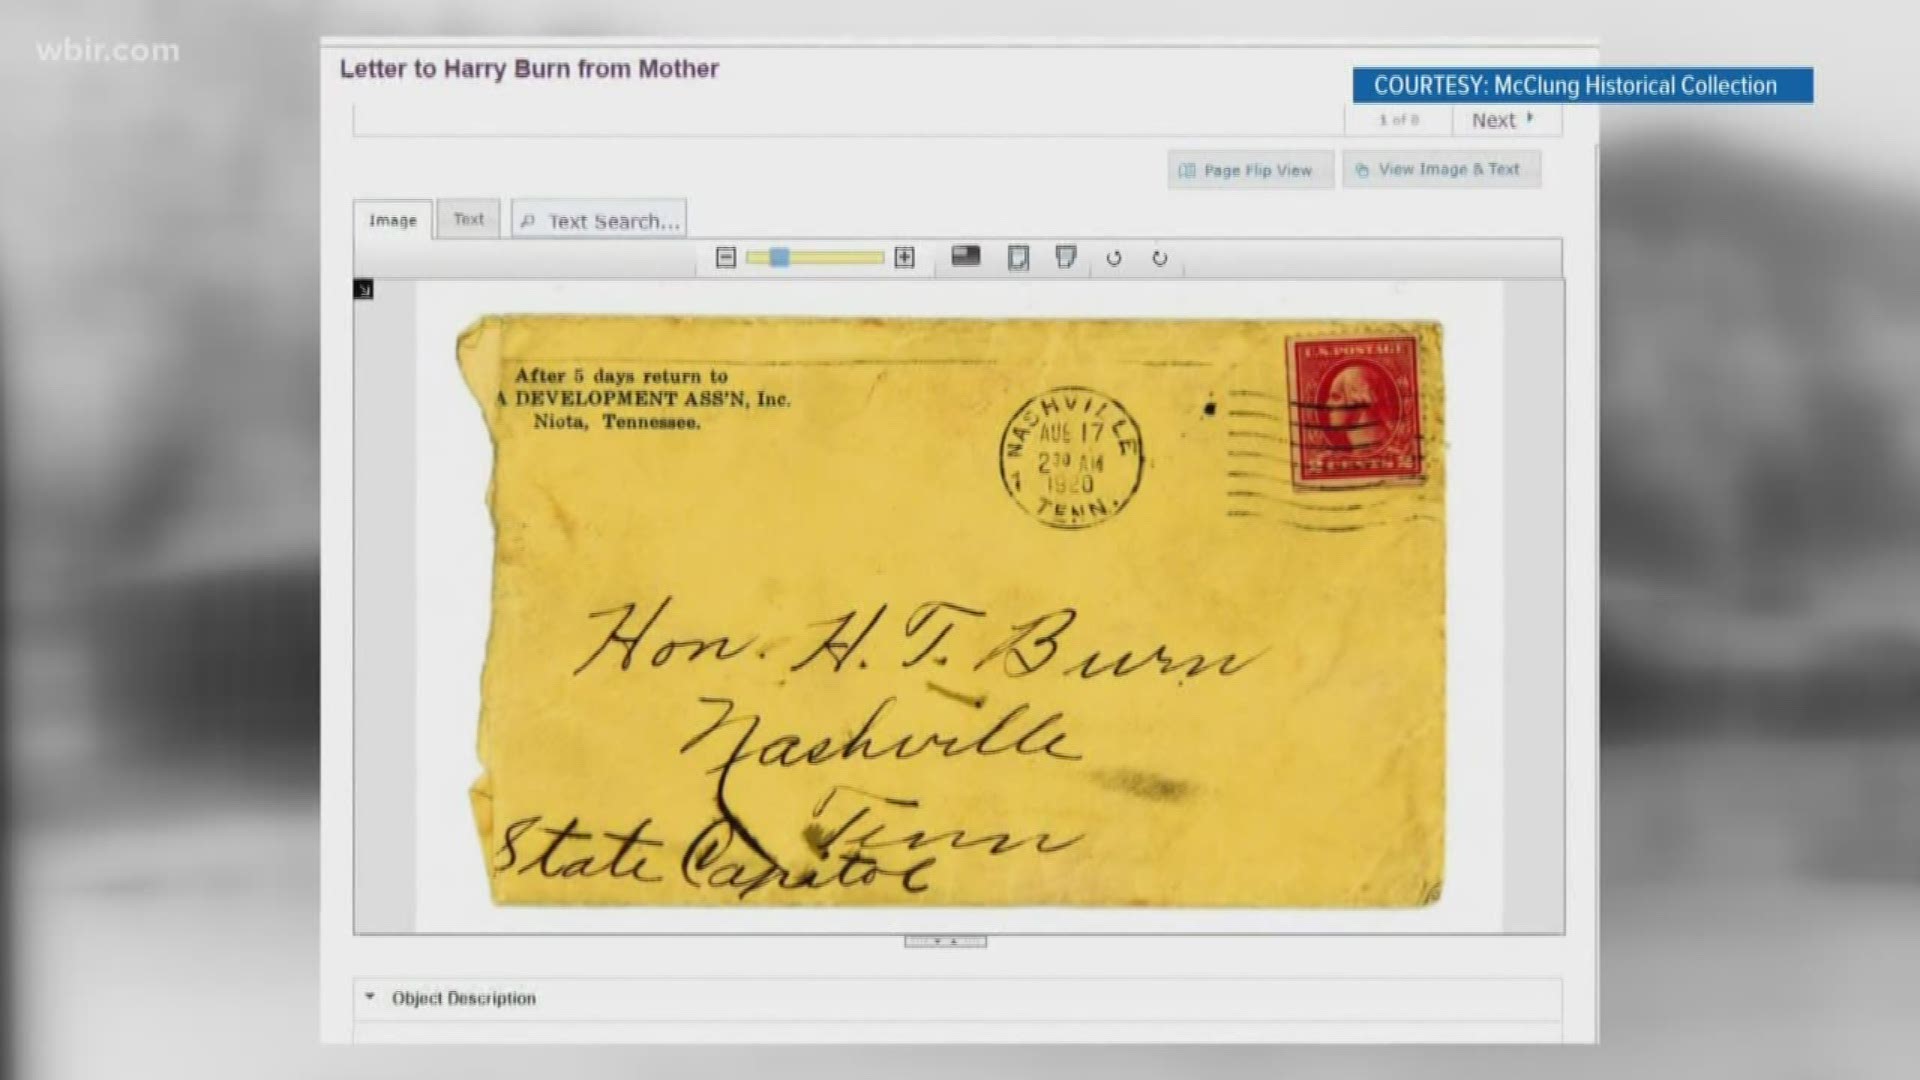 The "suffrage letter" is the most popular item online in the McClung Historical Collection.